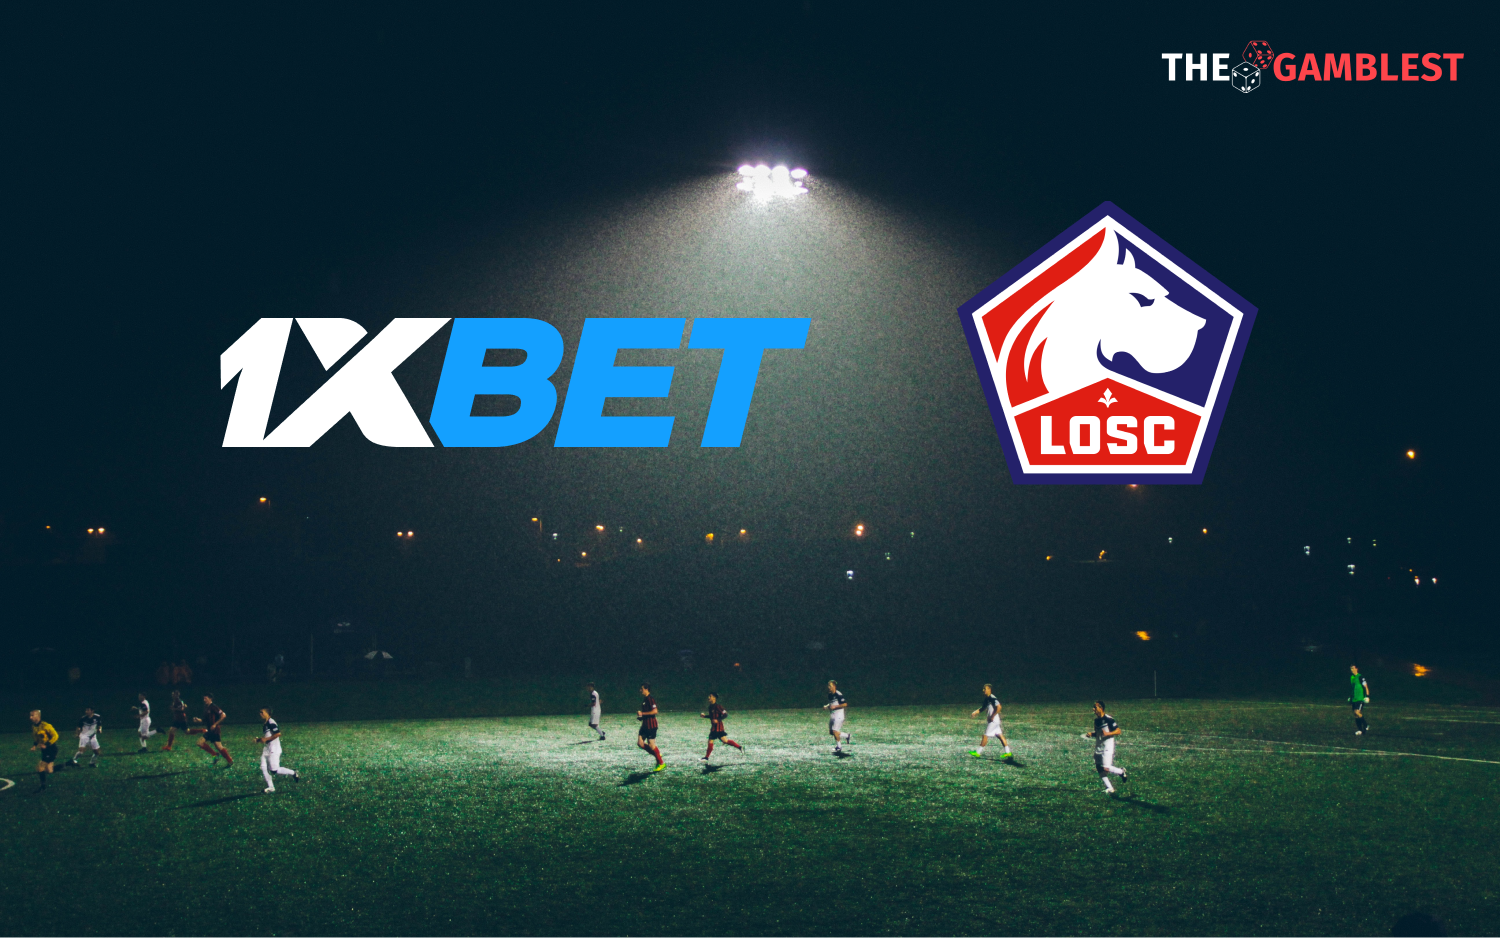 1xBet to become LOSC’s regional sponsor in Africa